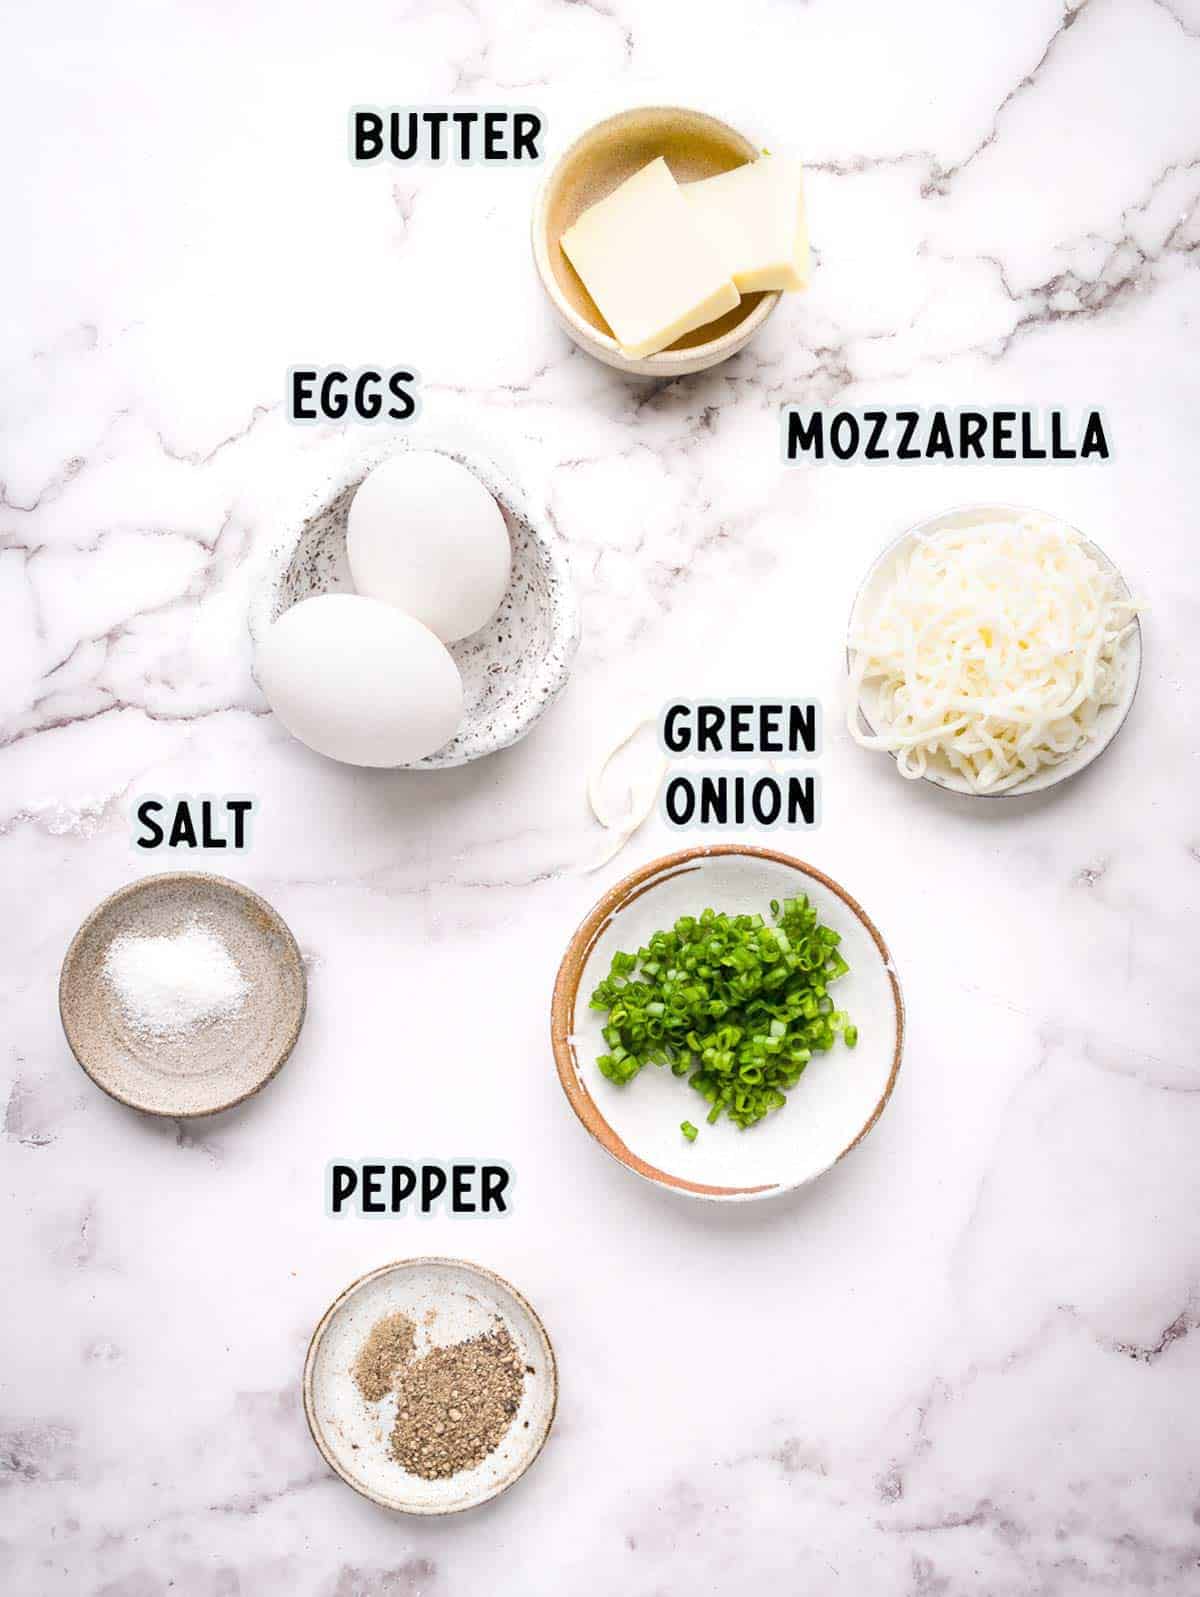 Ingredients to make fluffy scrambled eggs.